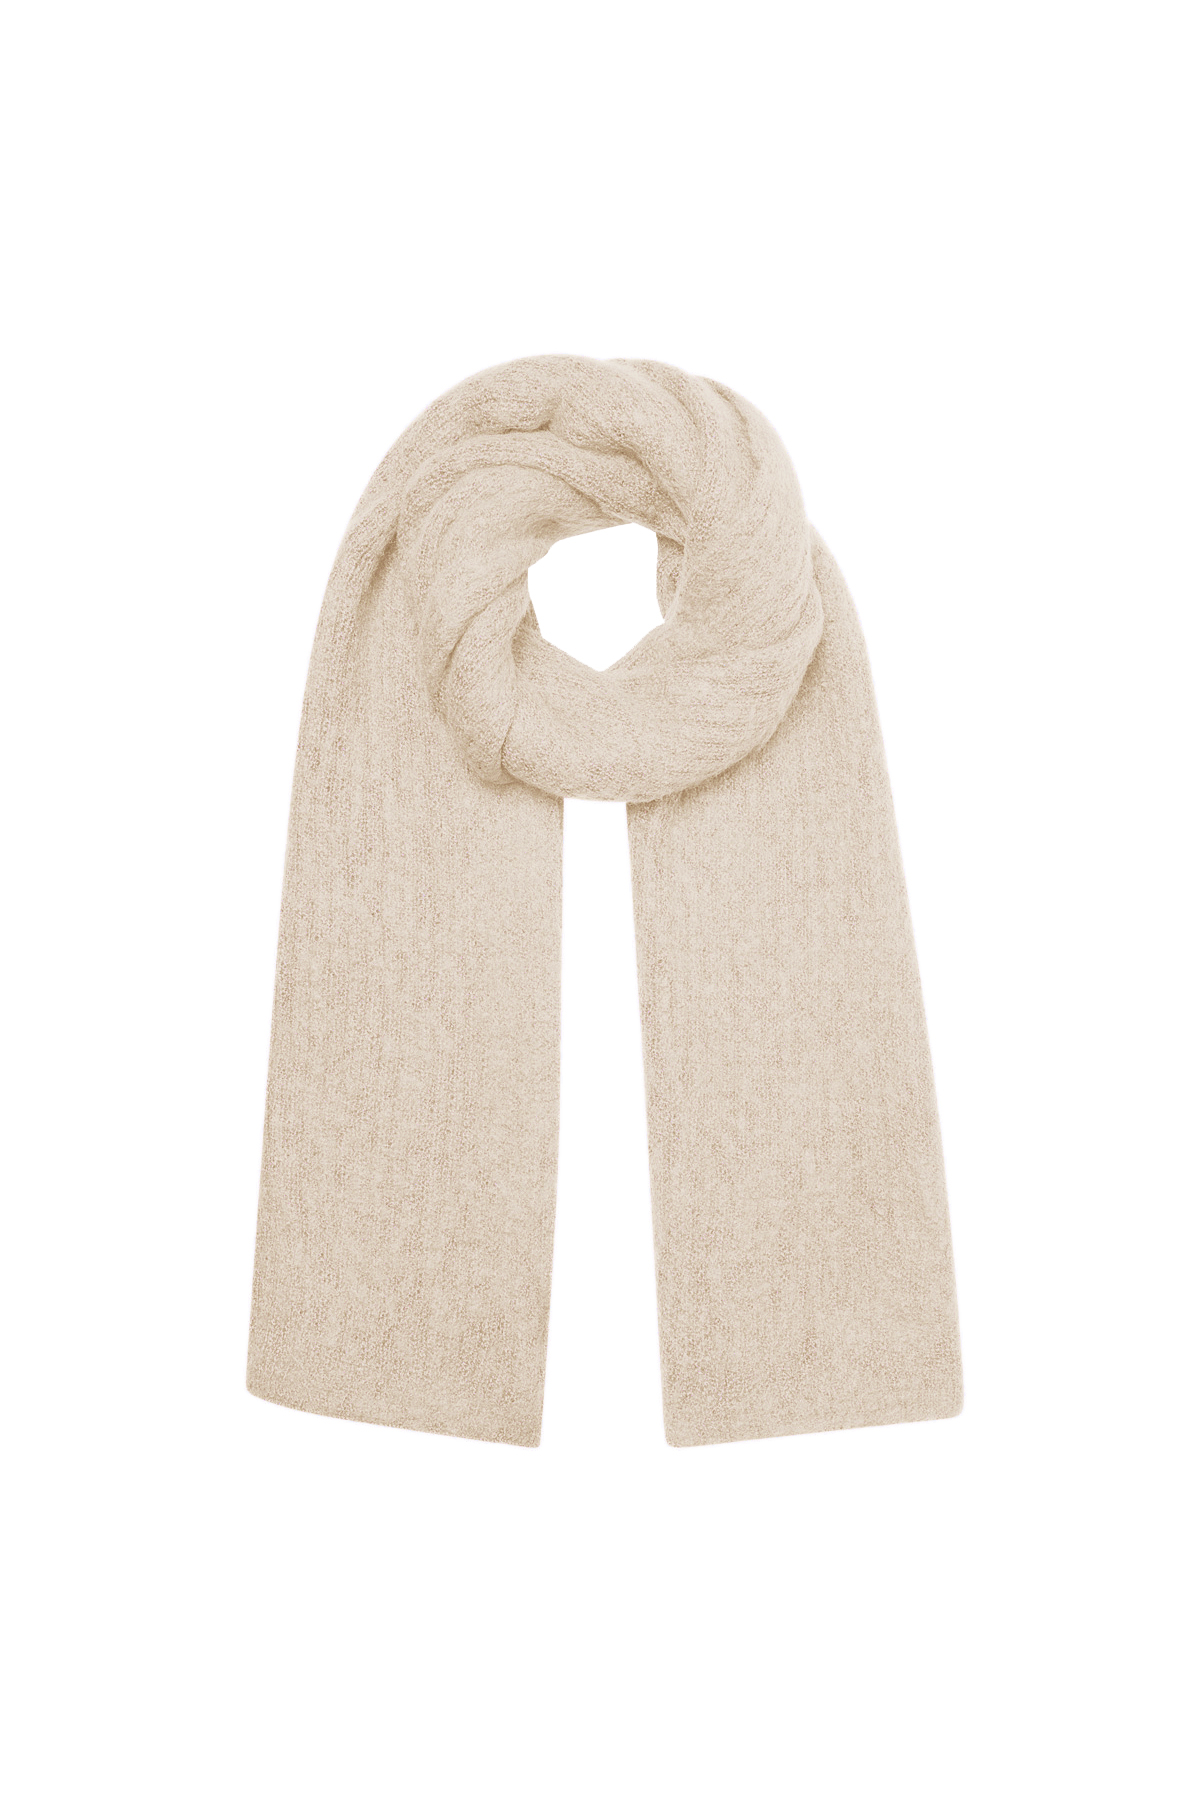 Scarf knitted plain - sand h5 